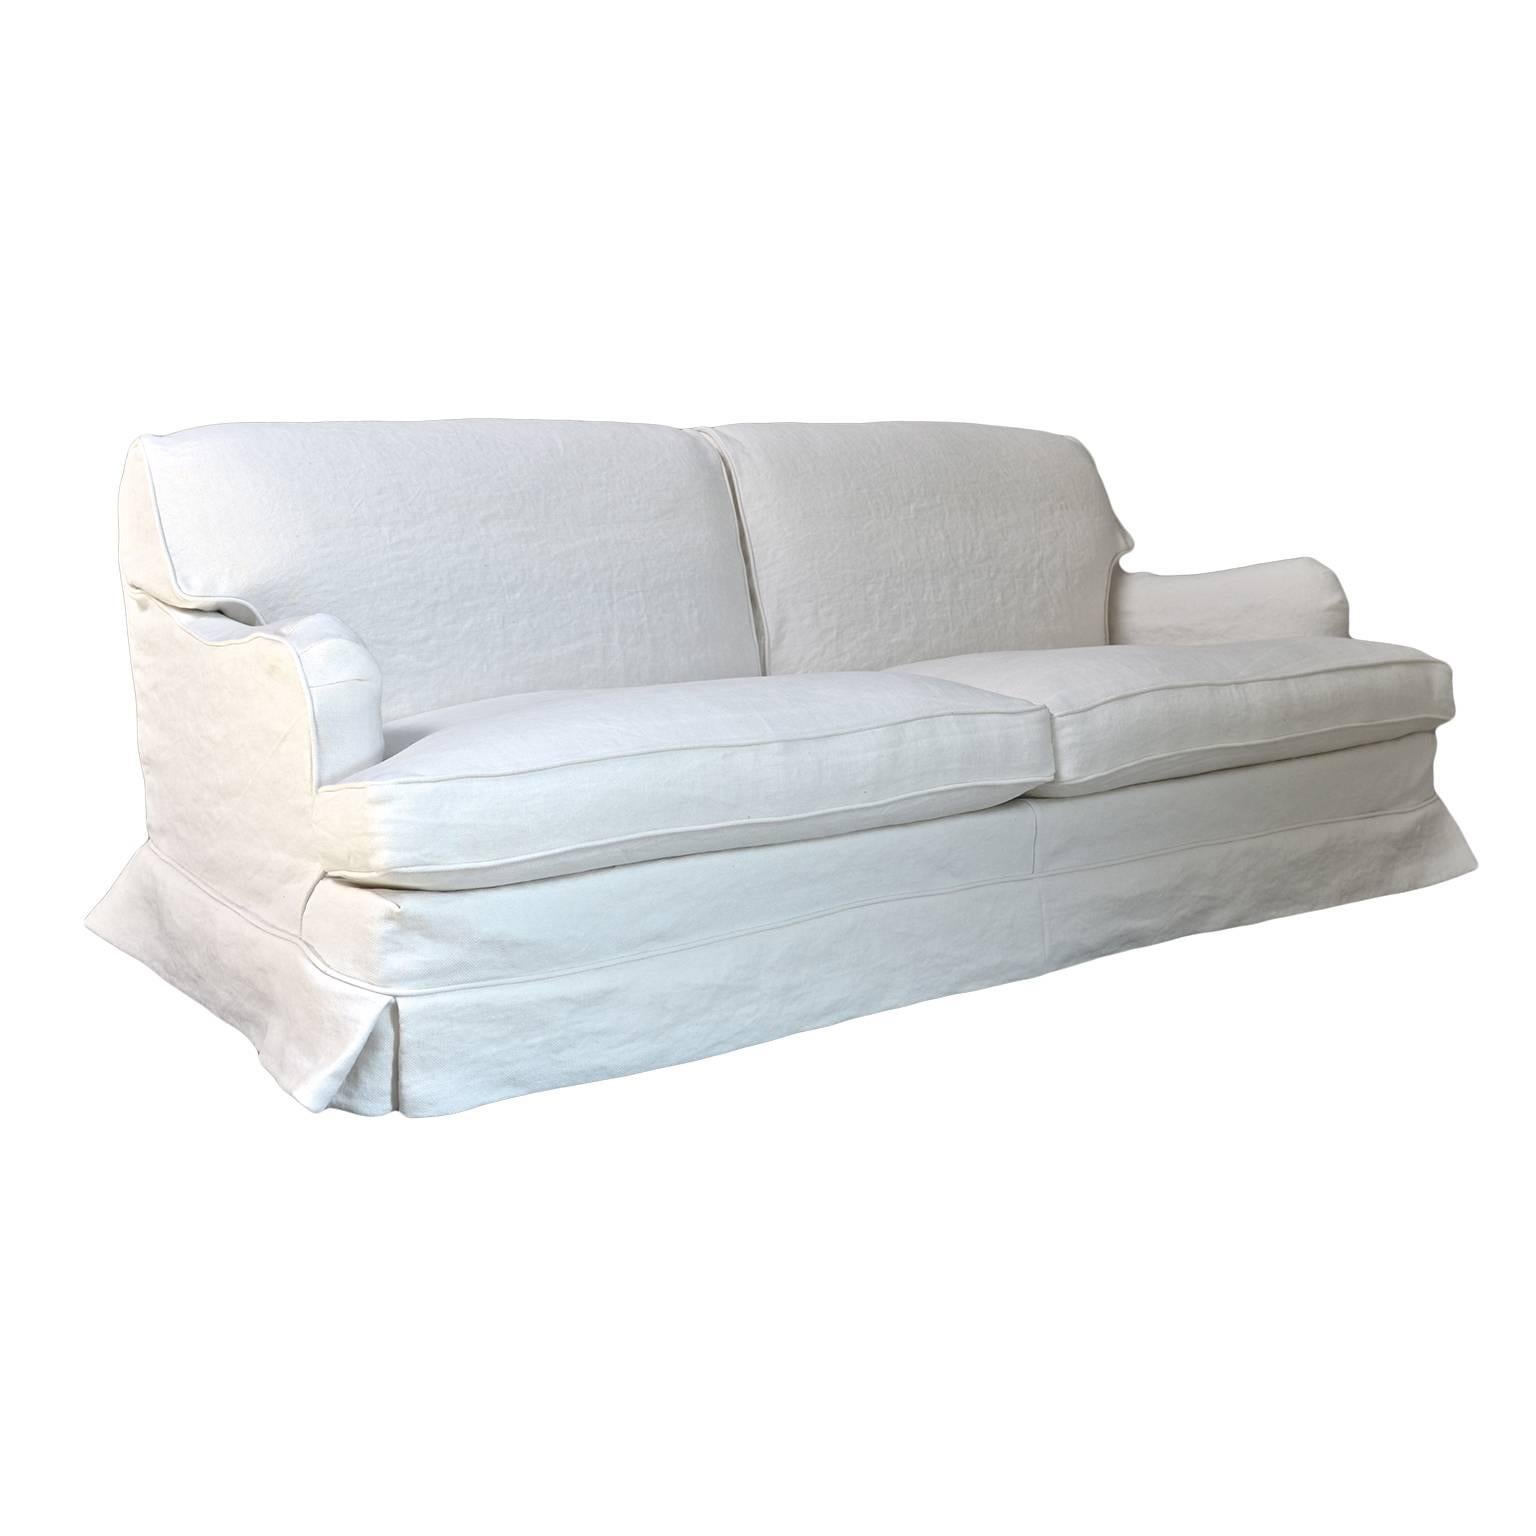 Made by am designs. High quality sofa hand made in Belgium, ultra-comfortable. Price including slipcover. Available in any size. Fabric shown Naturals Optical White. Cushions and fabric need to be ordered separately.